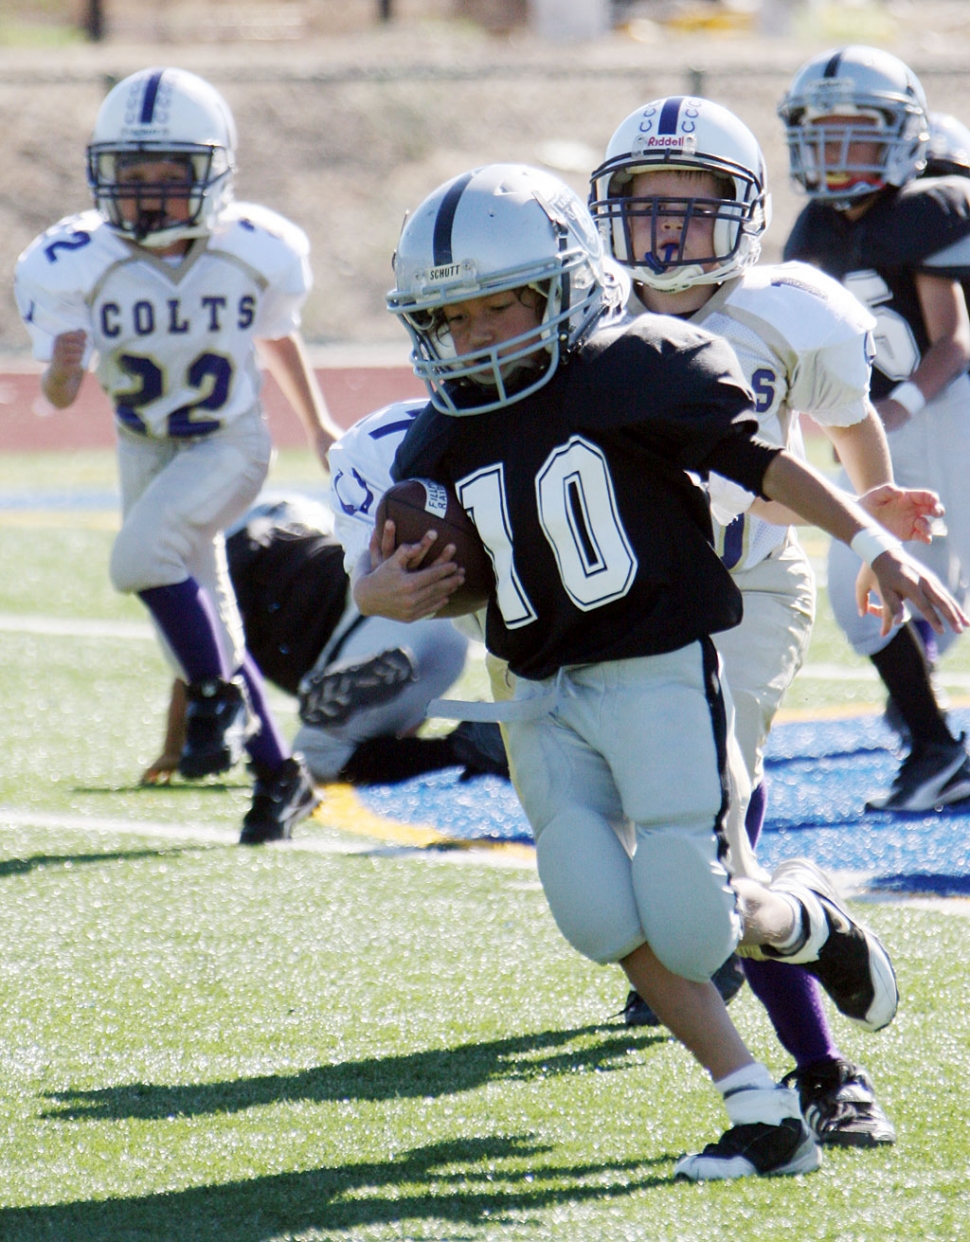 #10 of the Raiders Mighty Might’s runs the ball, last Saturday against the Crown Vally Colts. Raiders won 46-20.